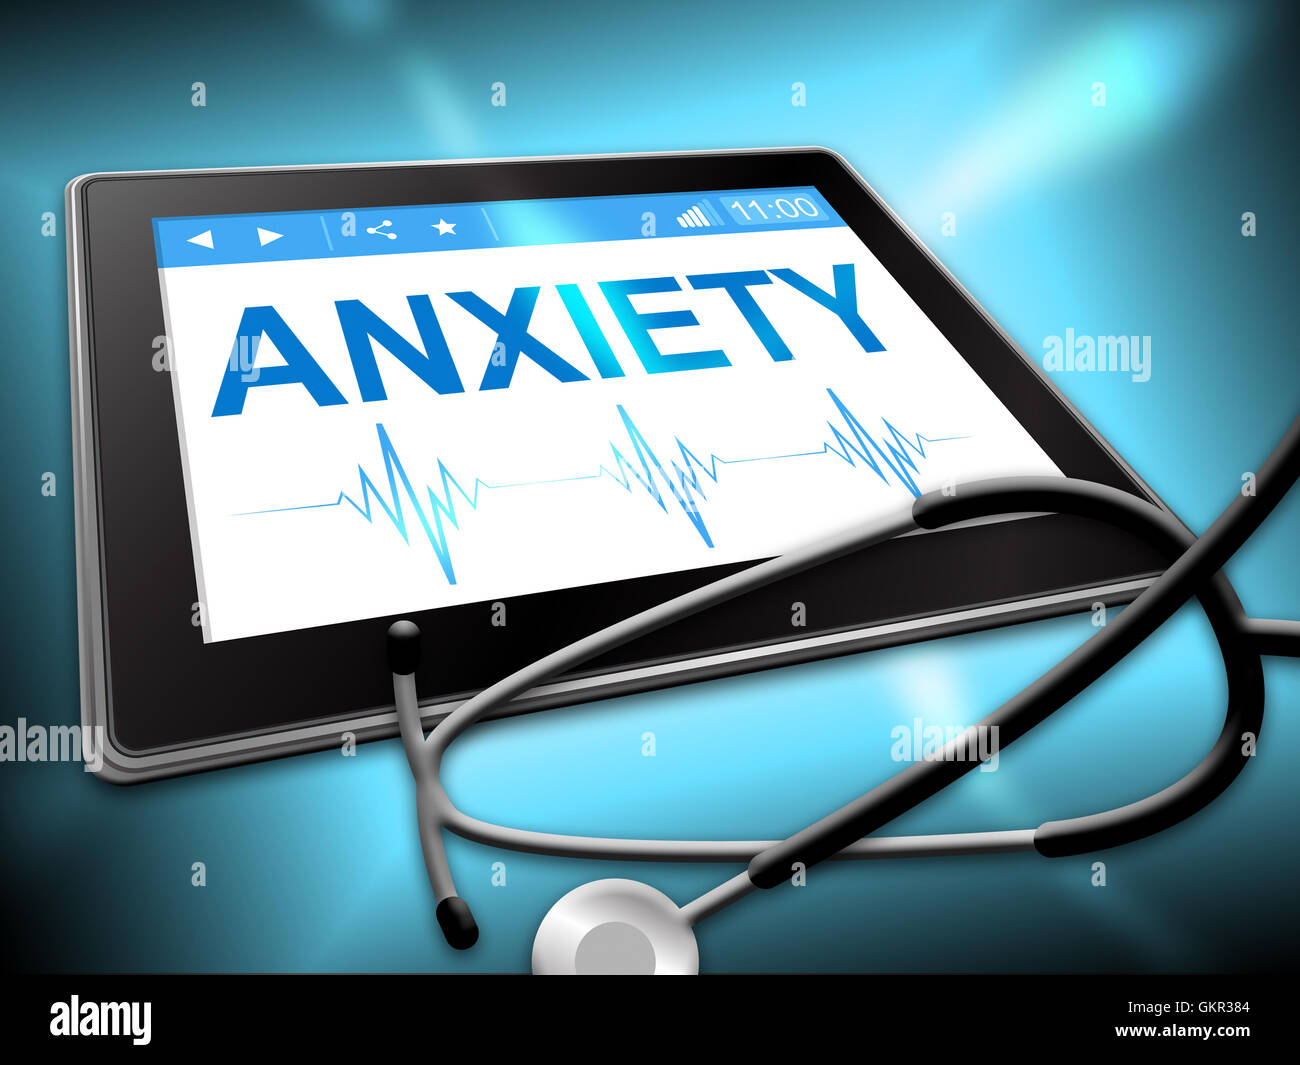 Anxiety Tablet Showing Angst Fear 3d Illustration Stock Photo